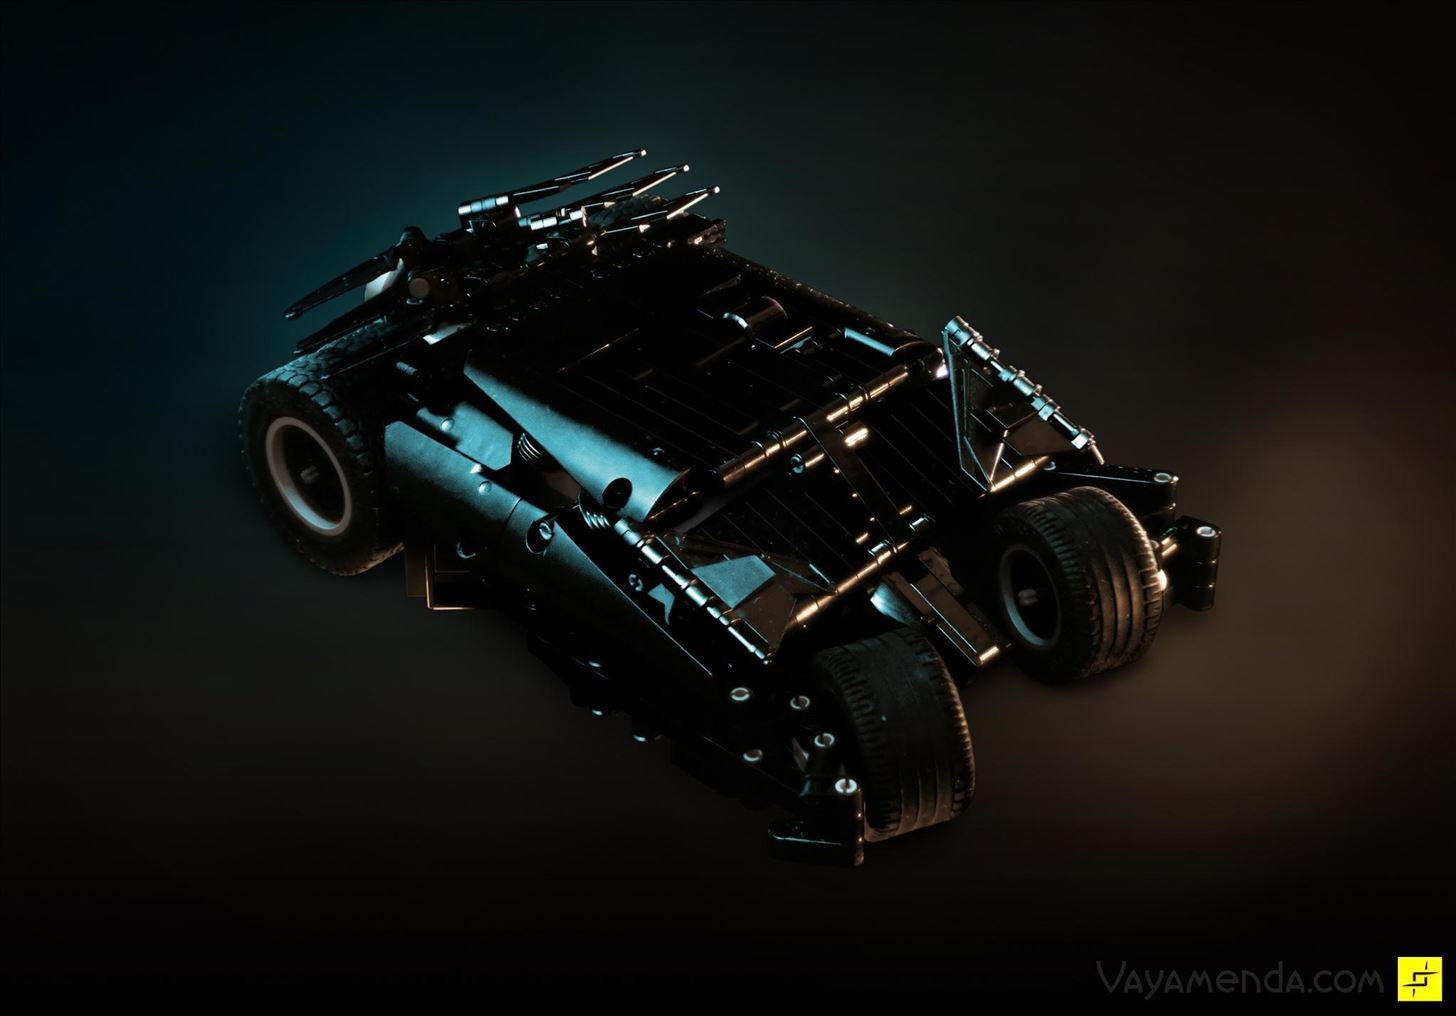 The Dark Knight's Bat and Tumbler Vehicles Come to Life with LEGOs